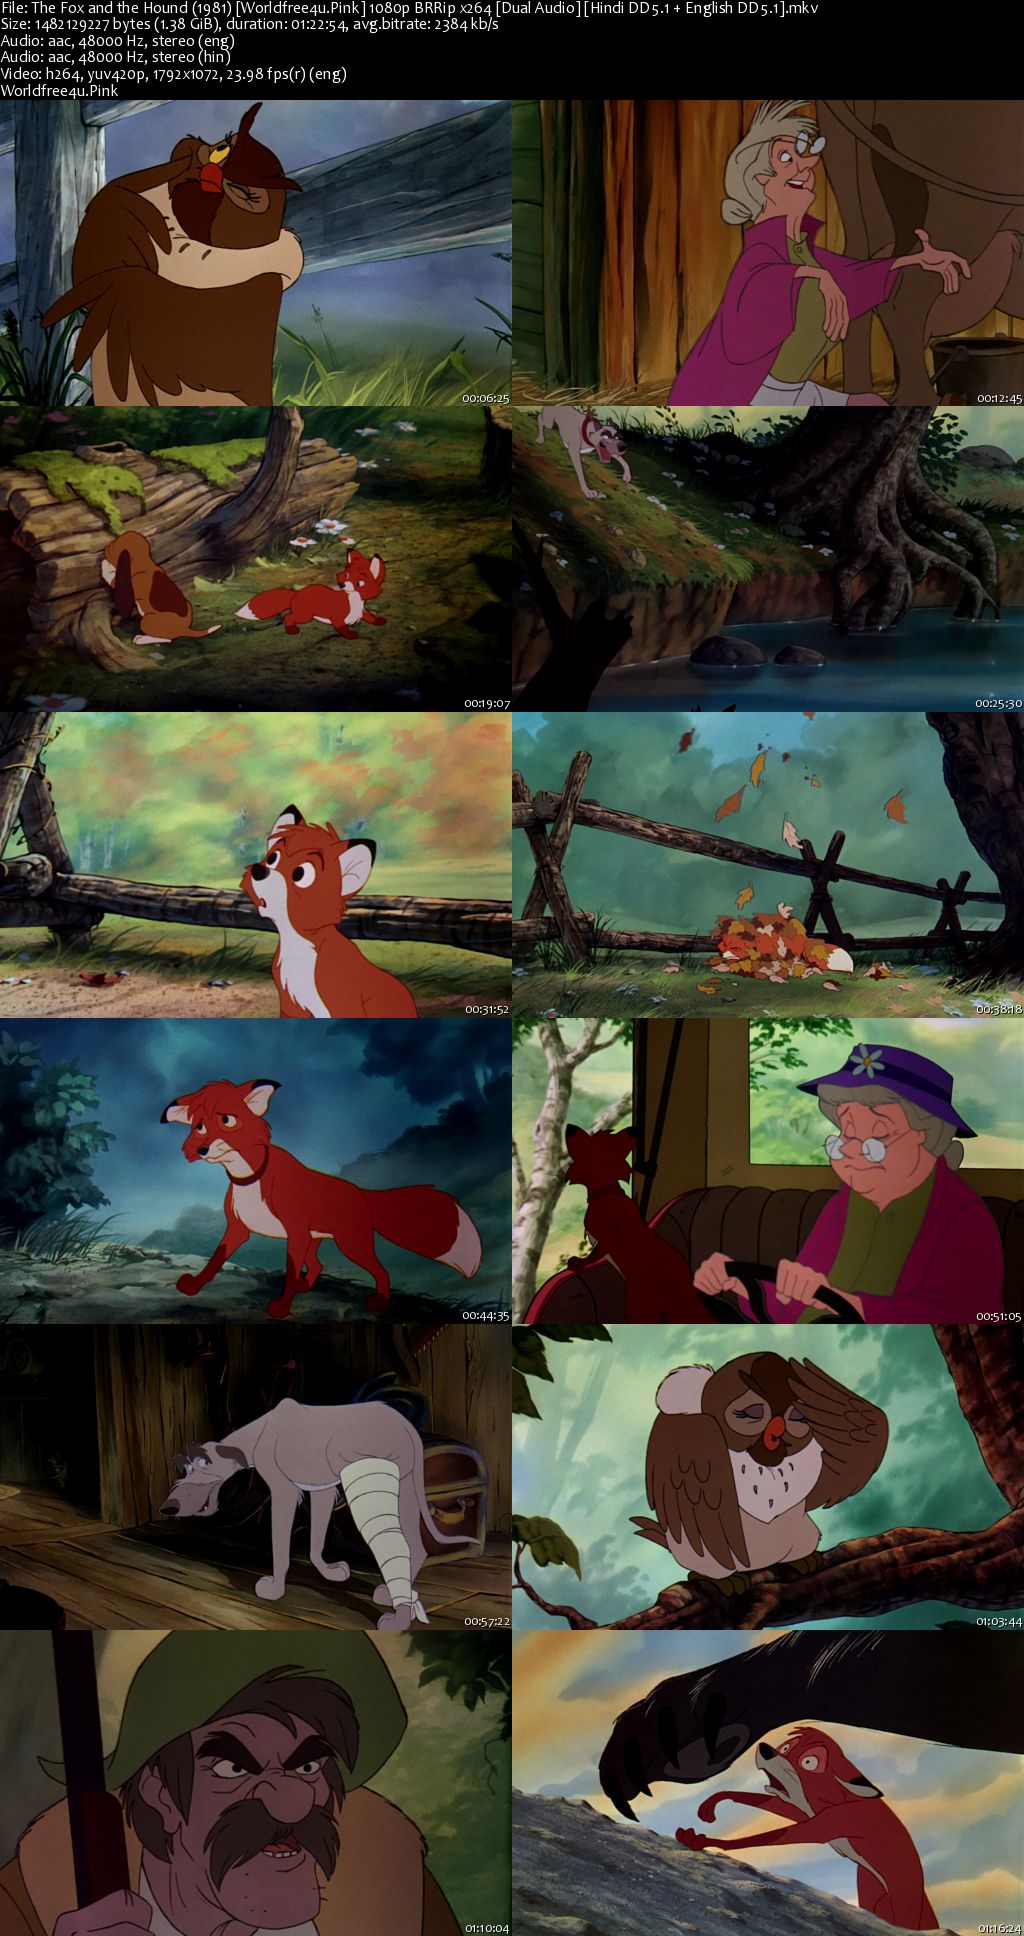 The Fox And The Hound 1981 BRRip 1080p Dual Audio